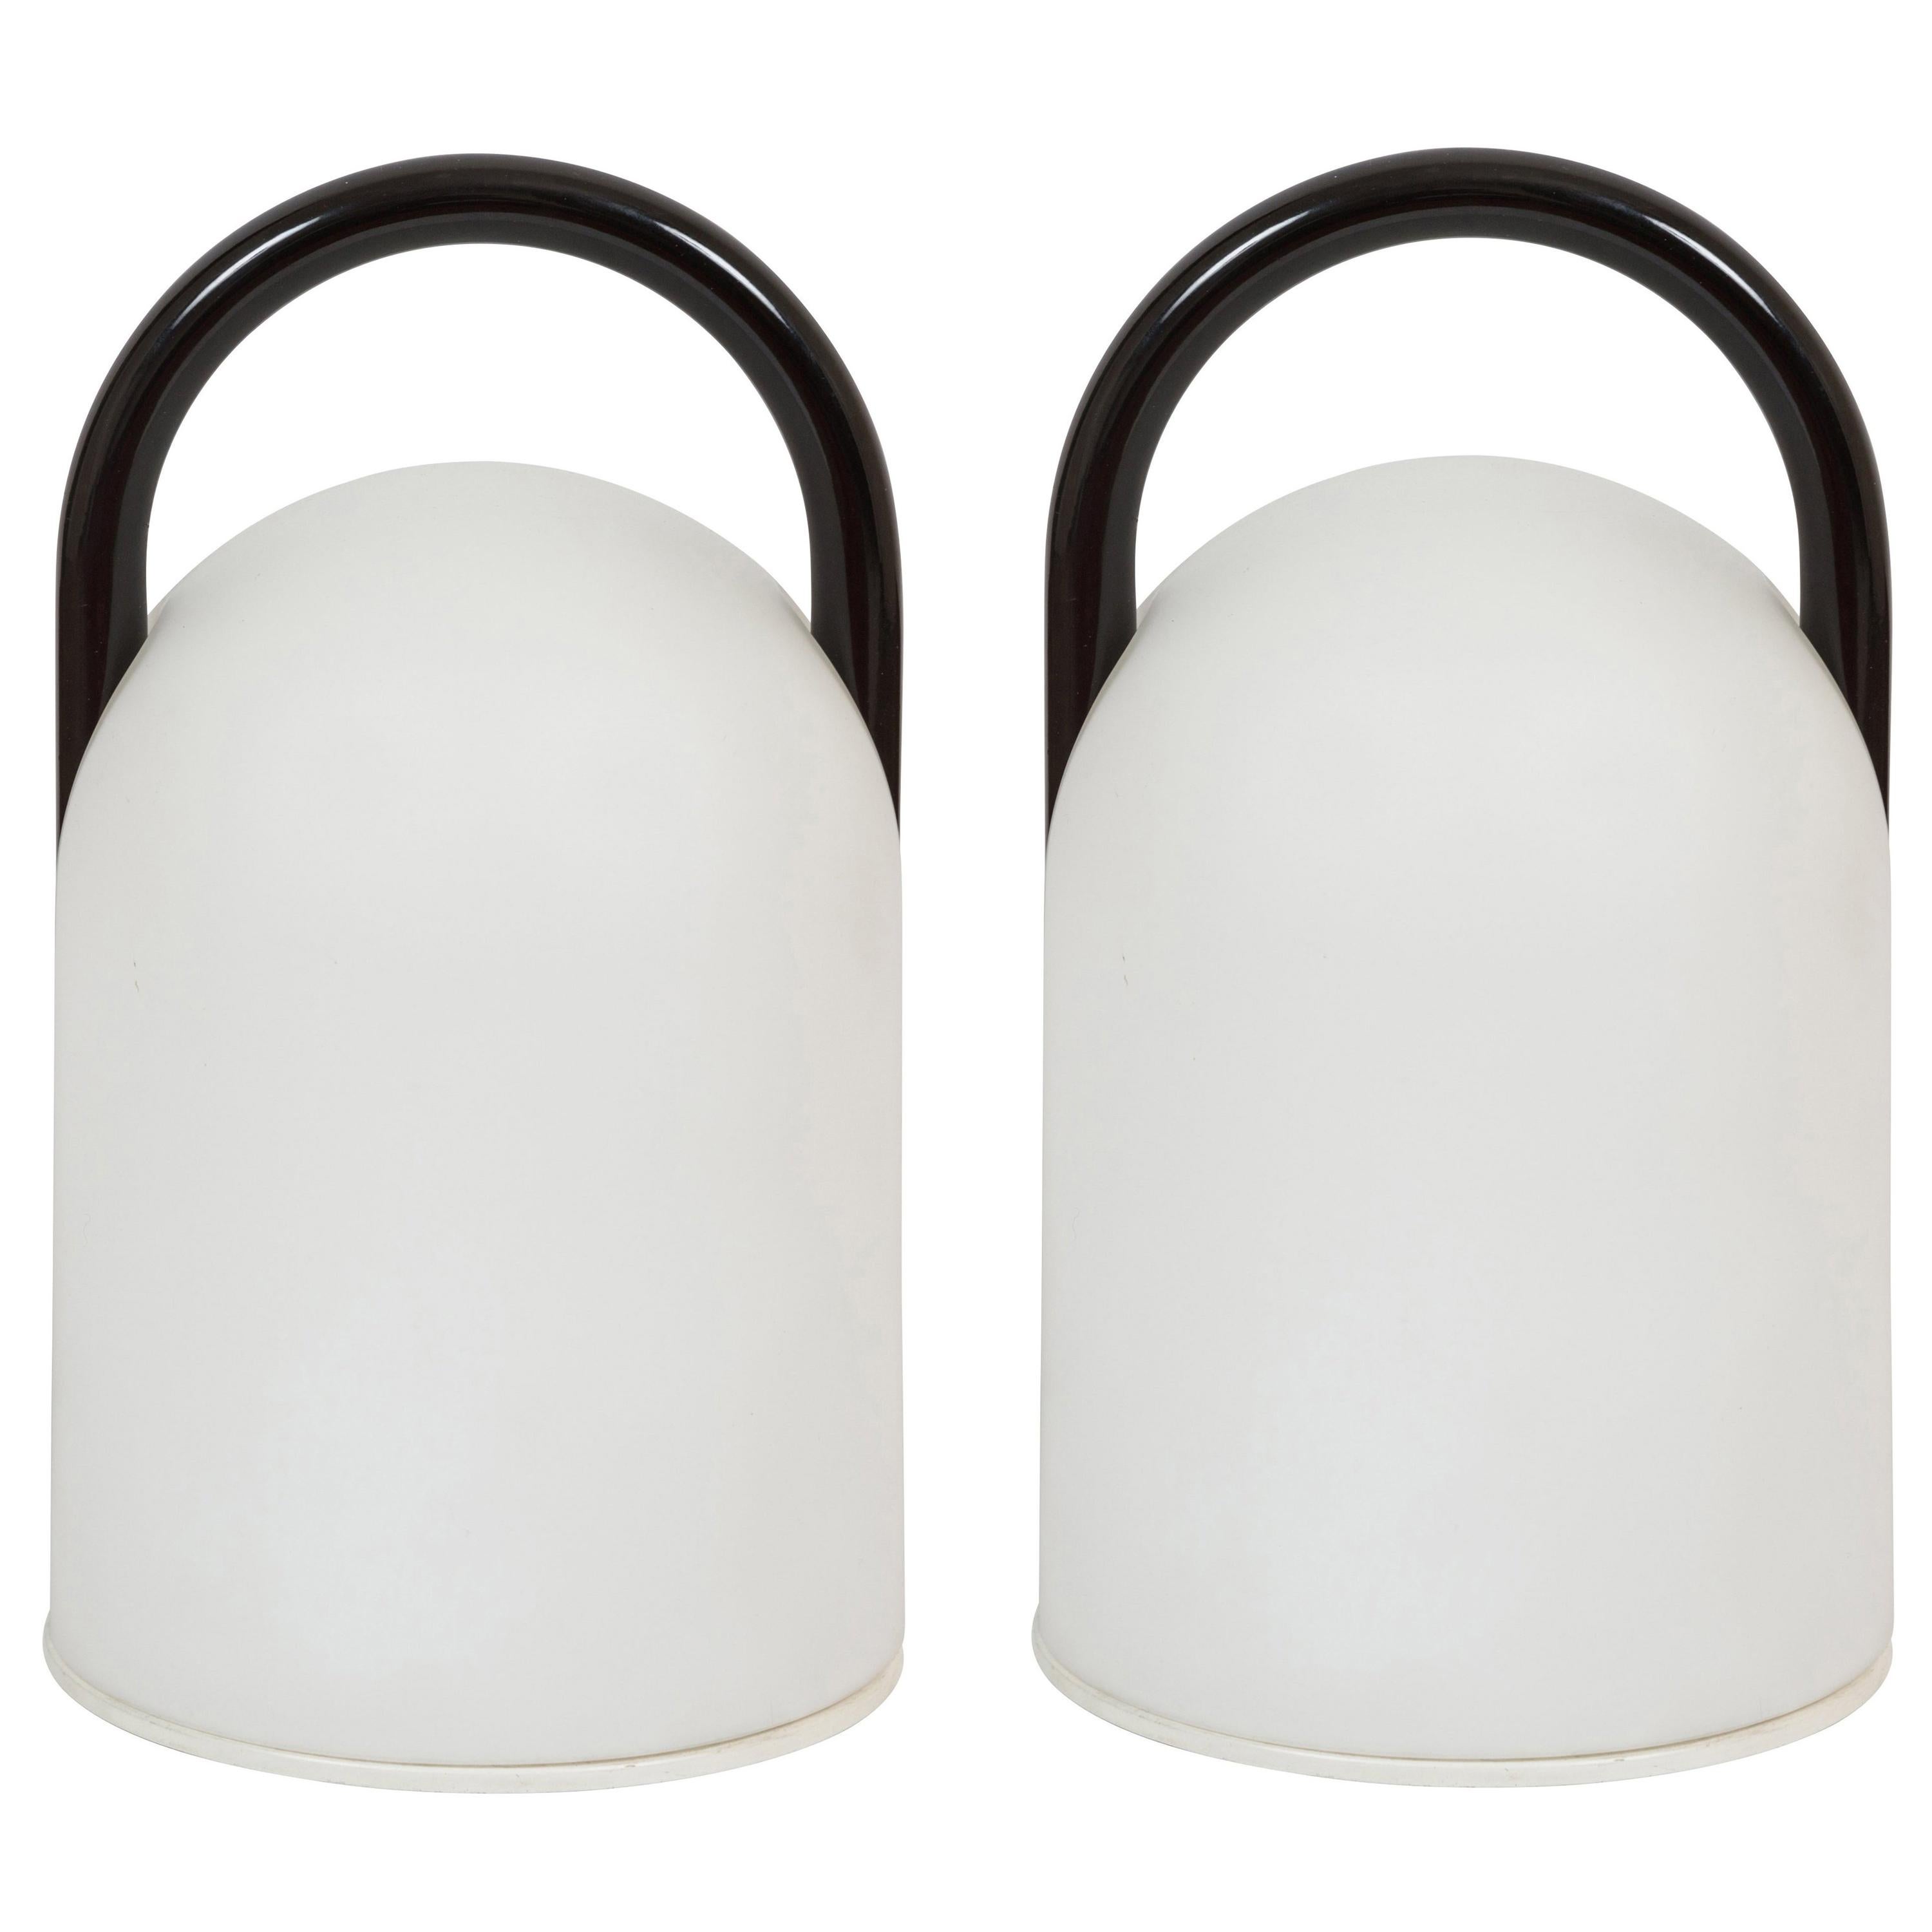 1980s Romolo Lanciani black 'Tender' table lamps for Tronconi. Executed in opaline glass and black enameled metal, Italy, circa 1980s. A surprisingly refined and minimal design, especially for its time and place. 

Price for a pair. Three lamps